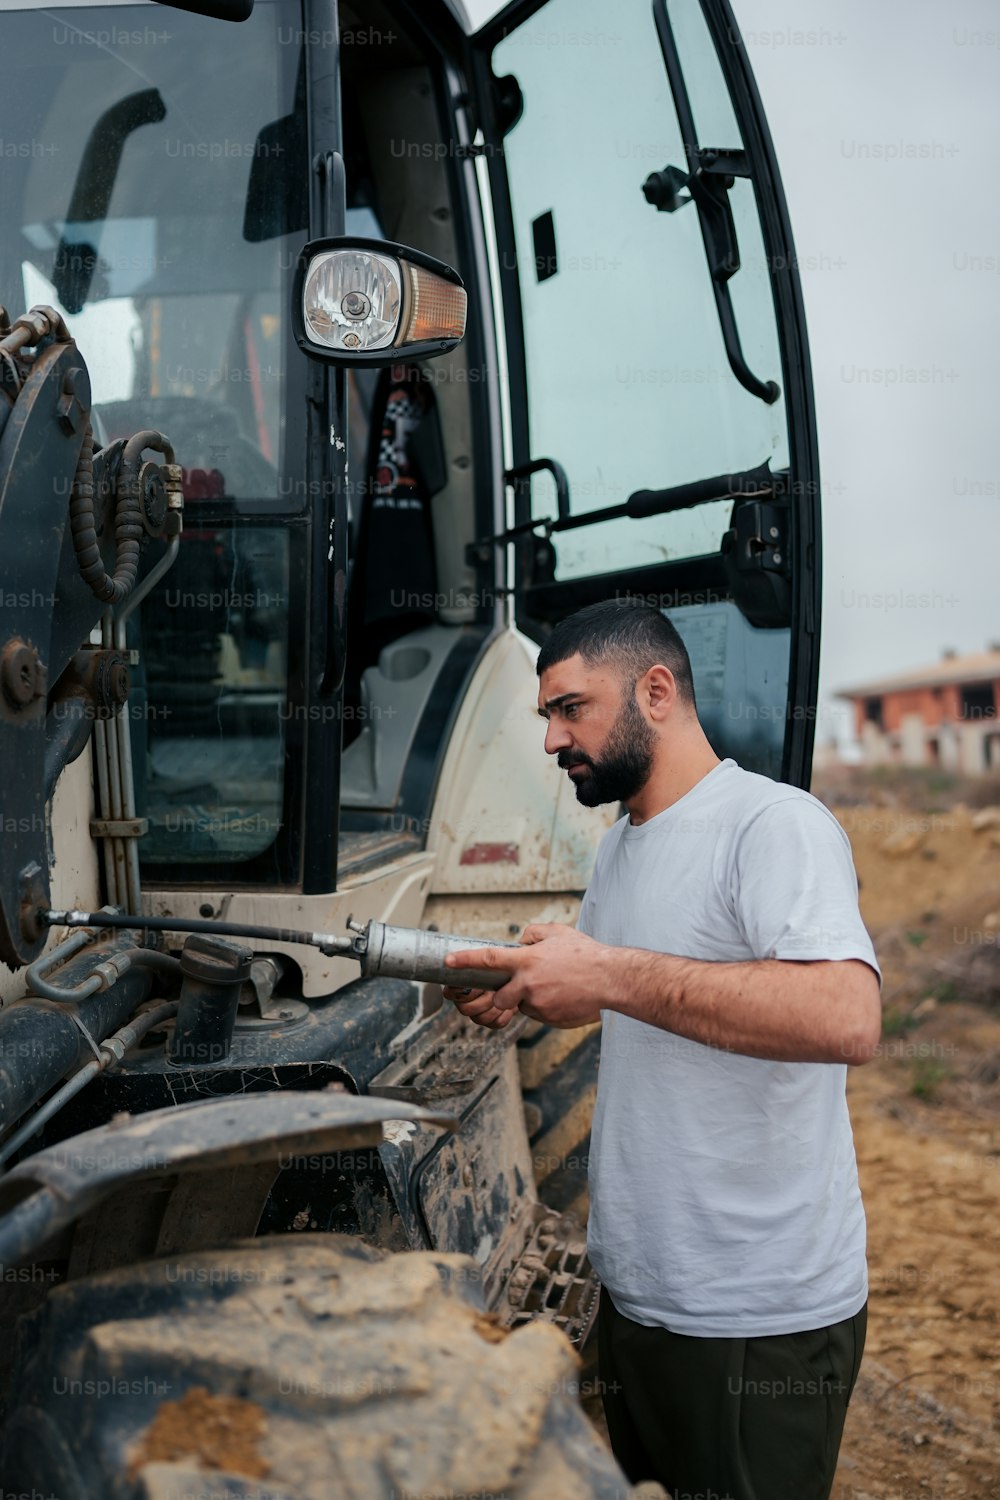 a man standing in front of a tractor